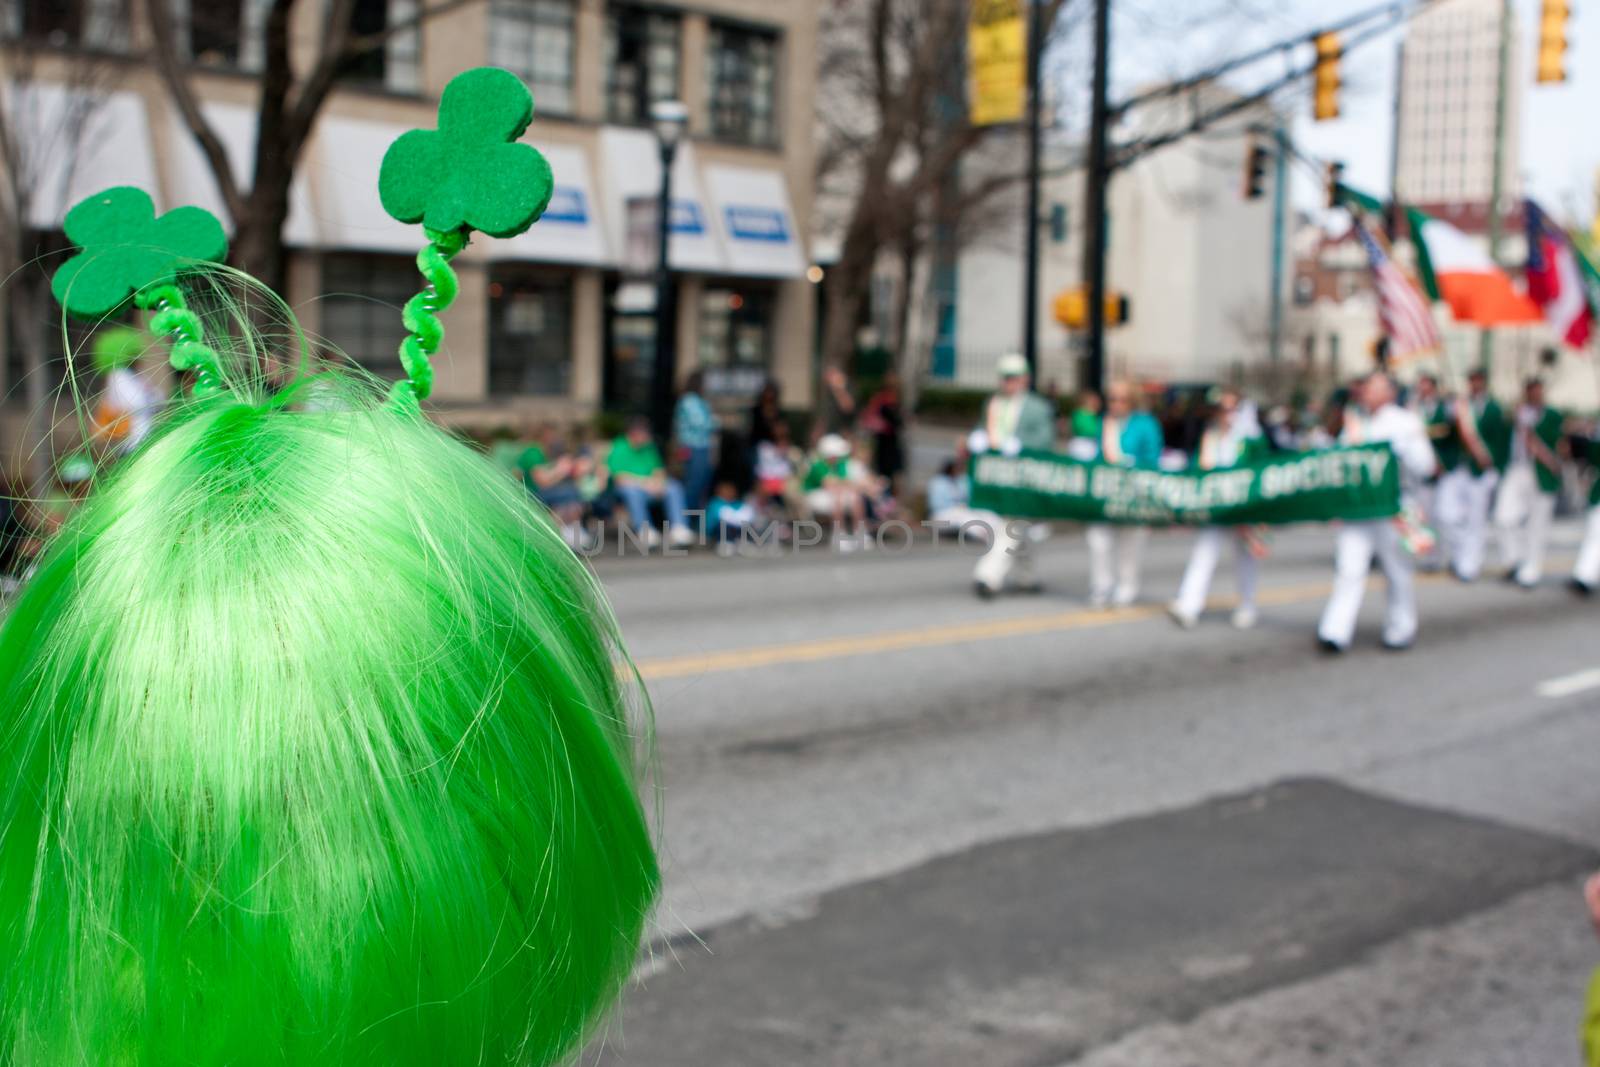 Peson In Green Wig Watches St. Patrick's Parade by BluIz60